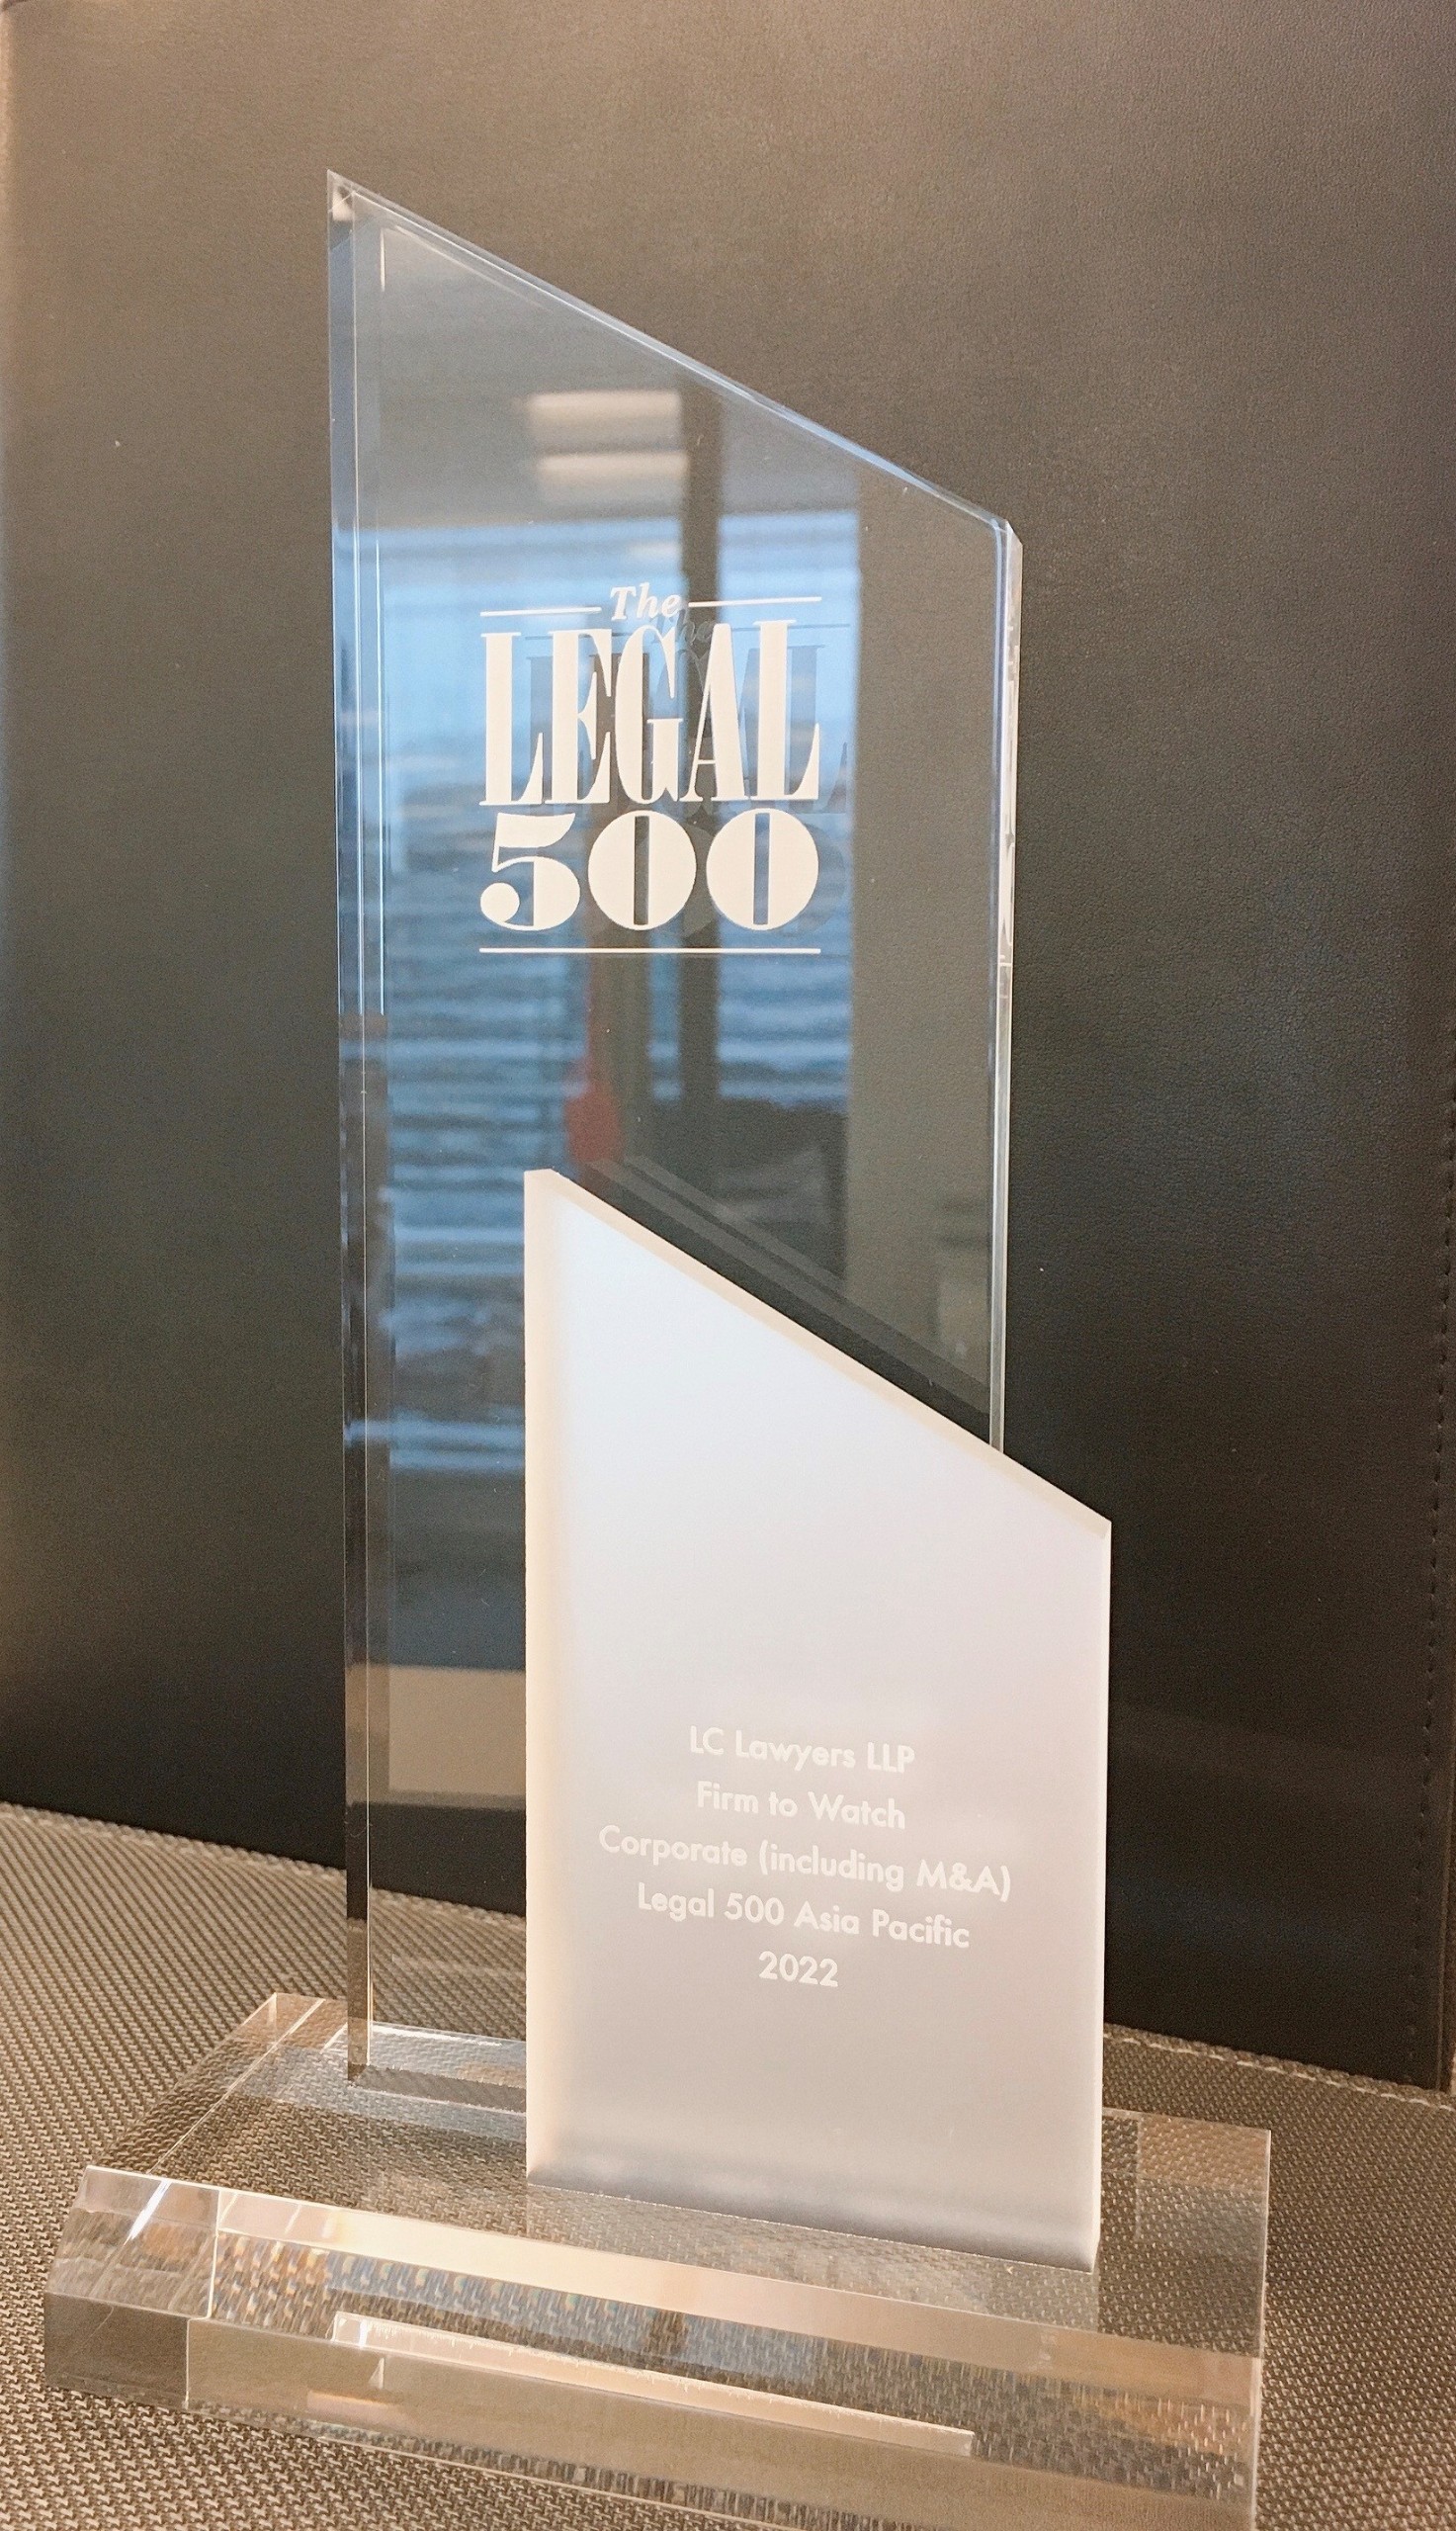 LC Lawyers LLP is recognised as “Firm to Watch” in Corporate (including M&A) by Legal 500 Asia Pacific, 2022